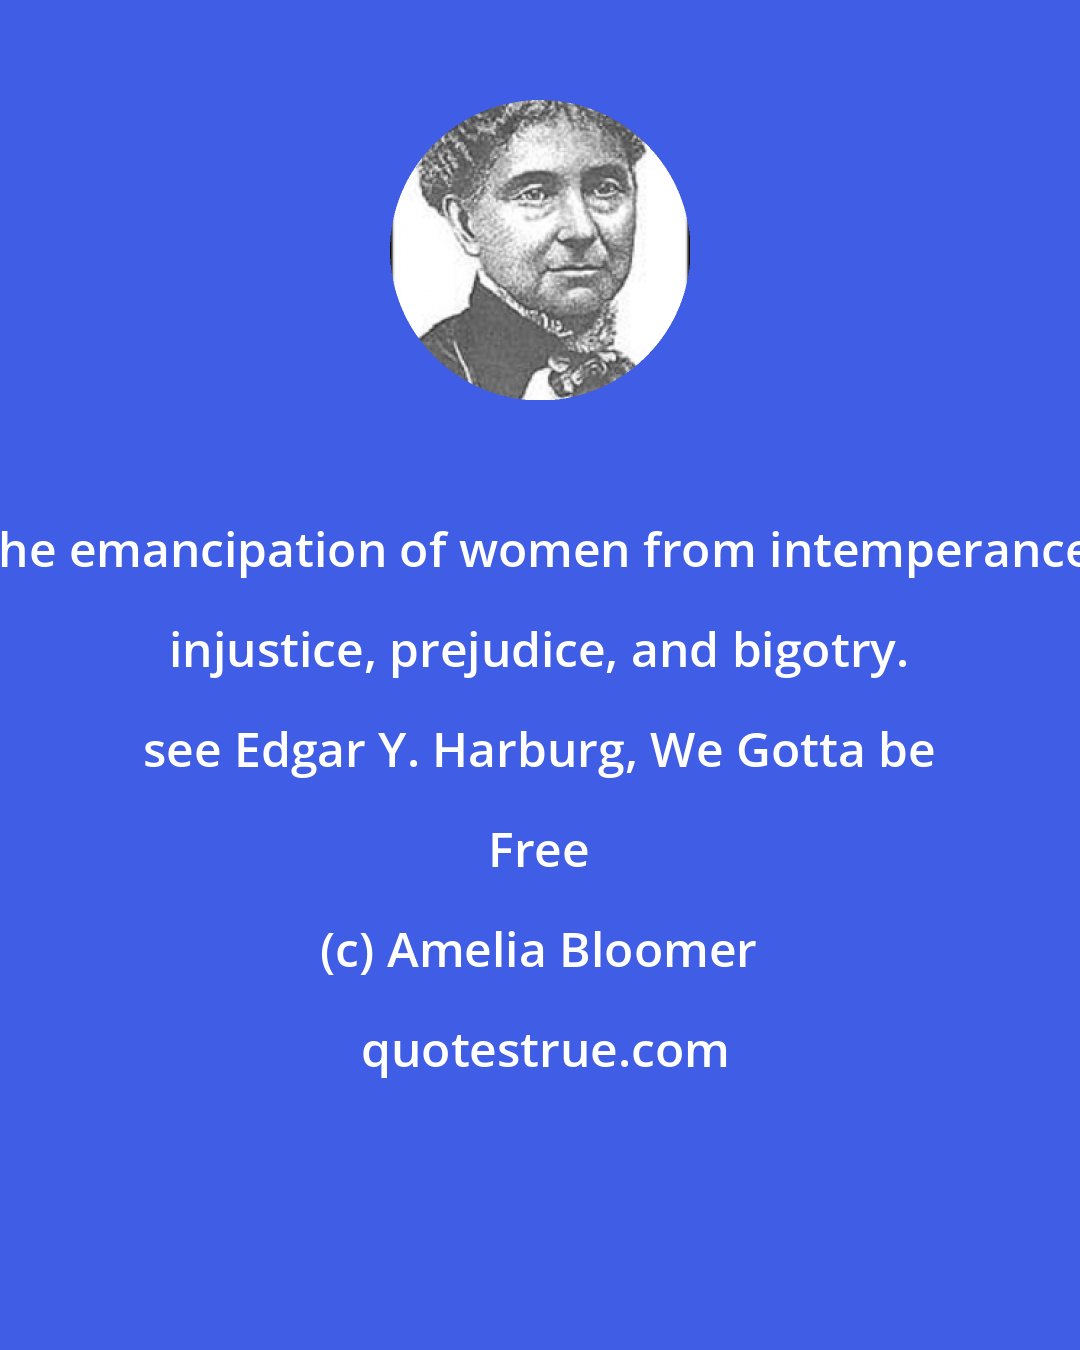 Amelia Bloomer: The emancipation of women from intemperance, injustice, prejudice, and bigotry. see Edgar Y. Harburg, We Gotta be Free